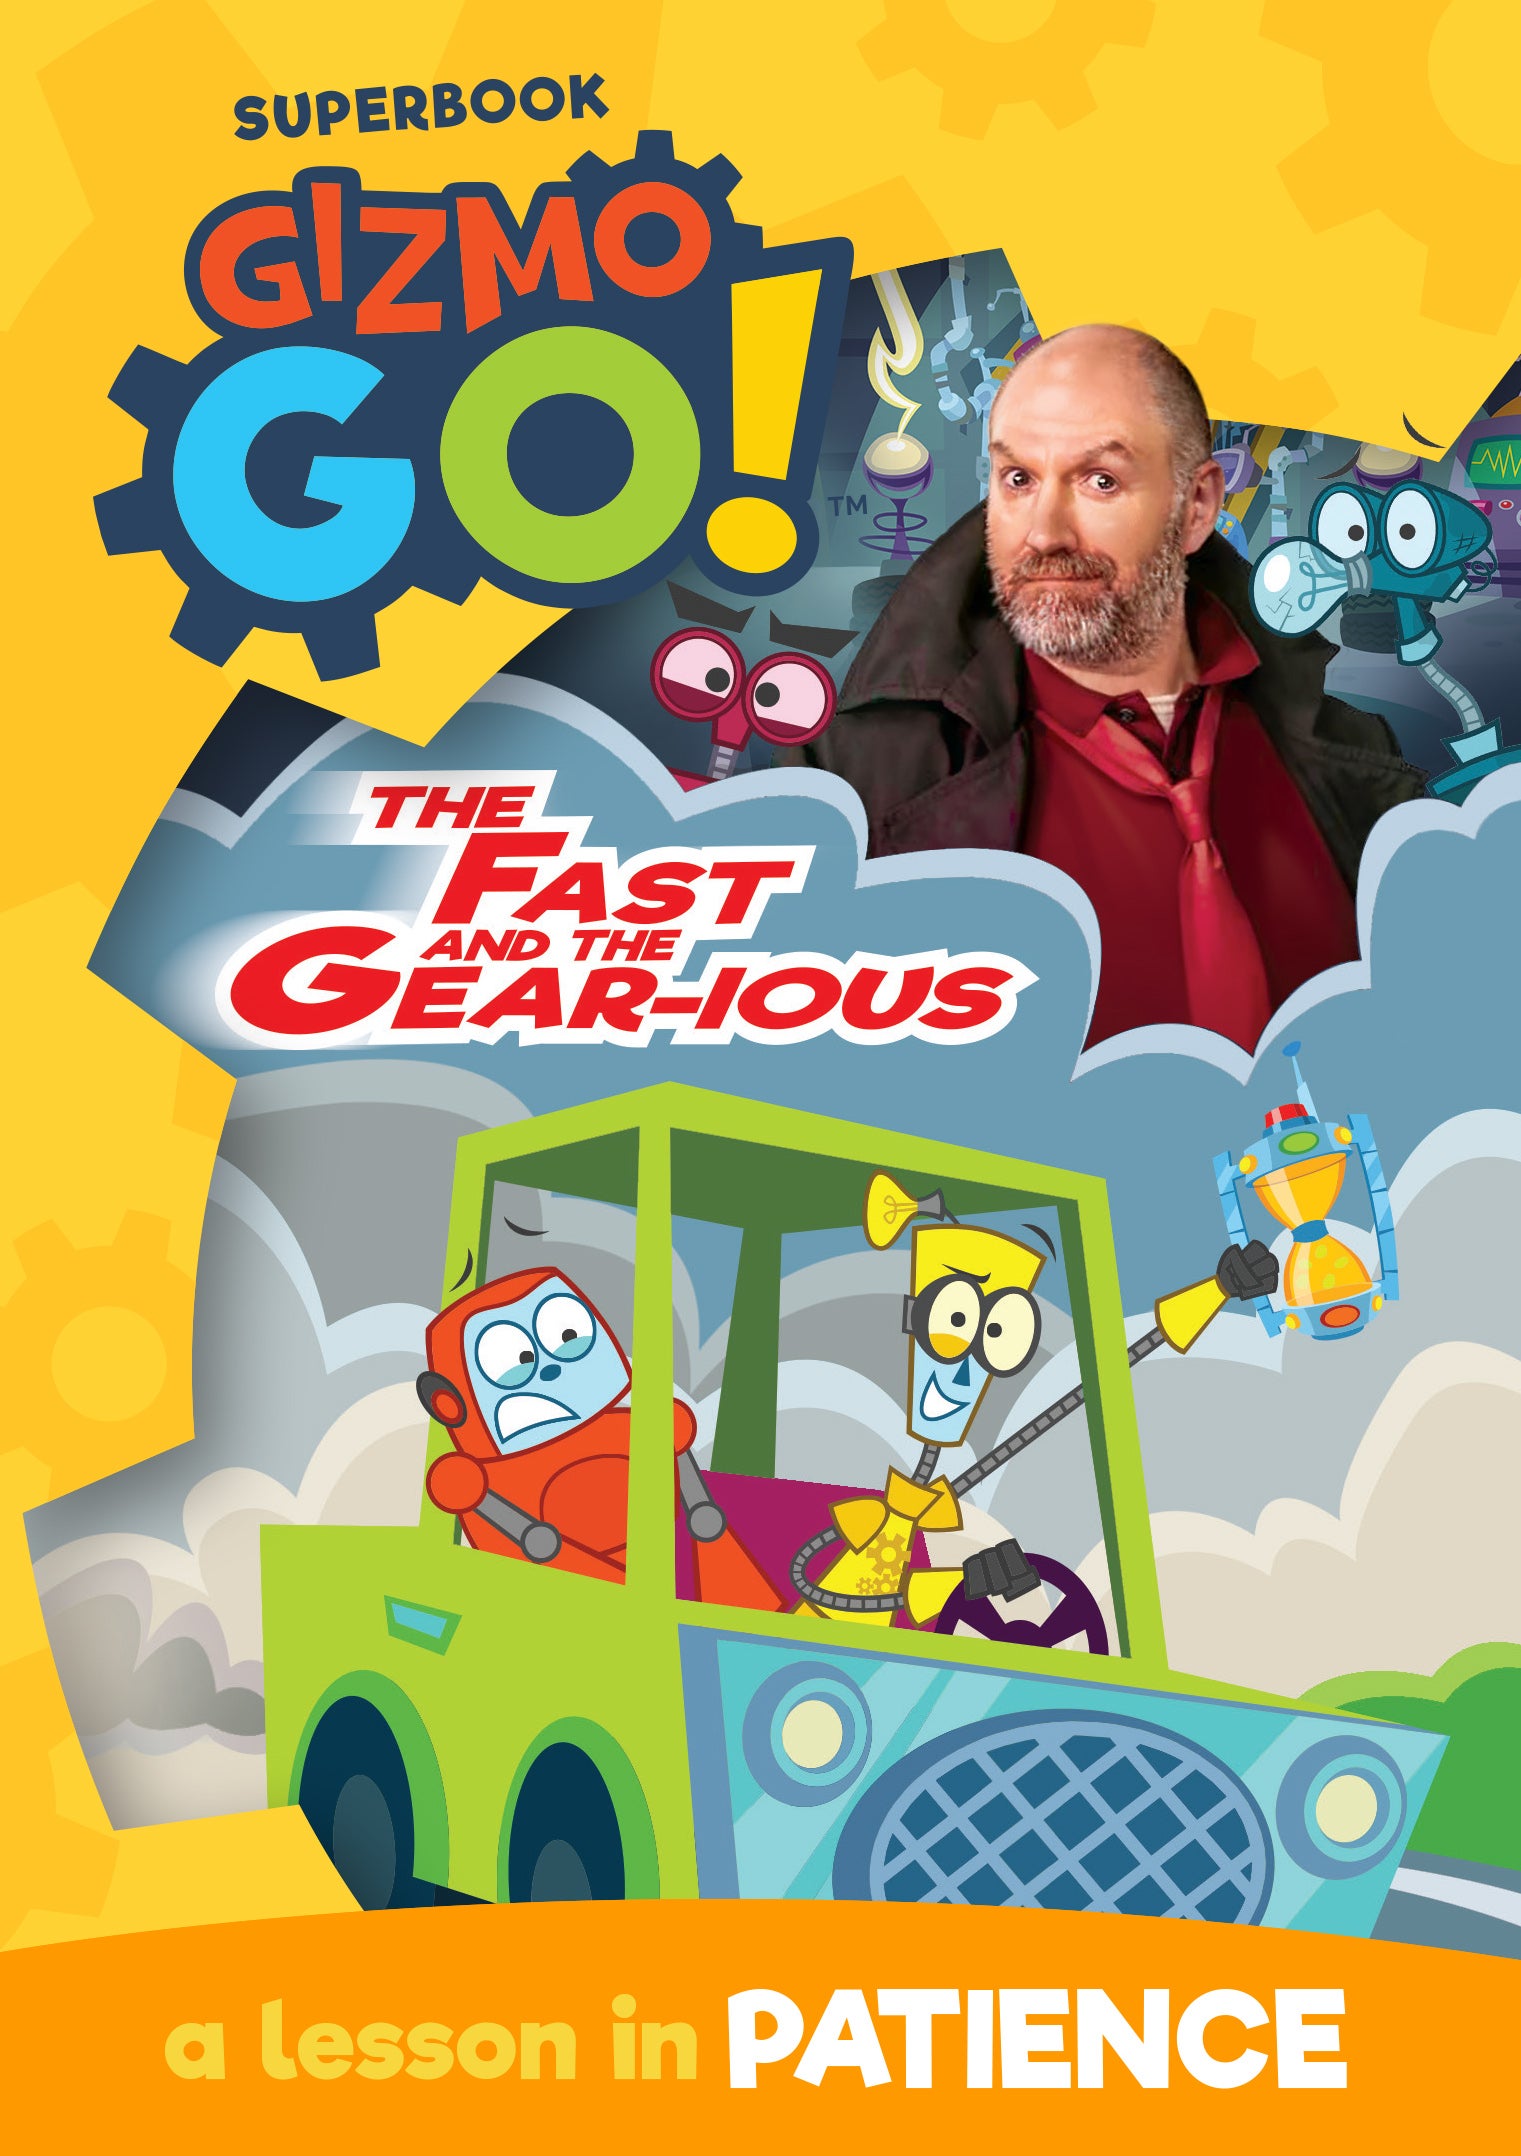 The Fast and the Gear-ious